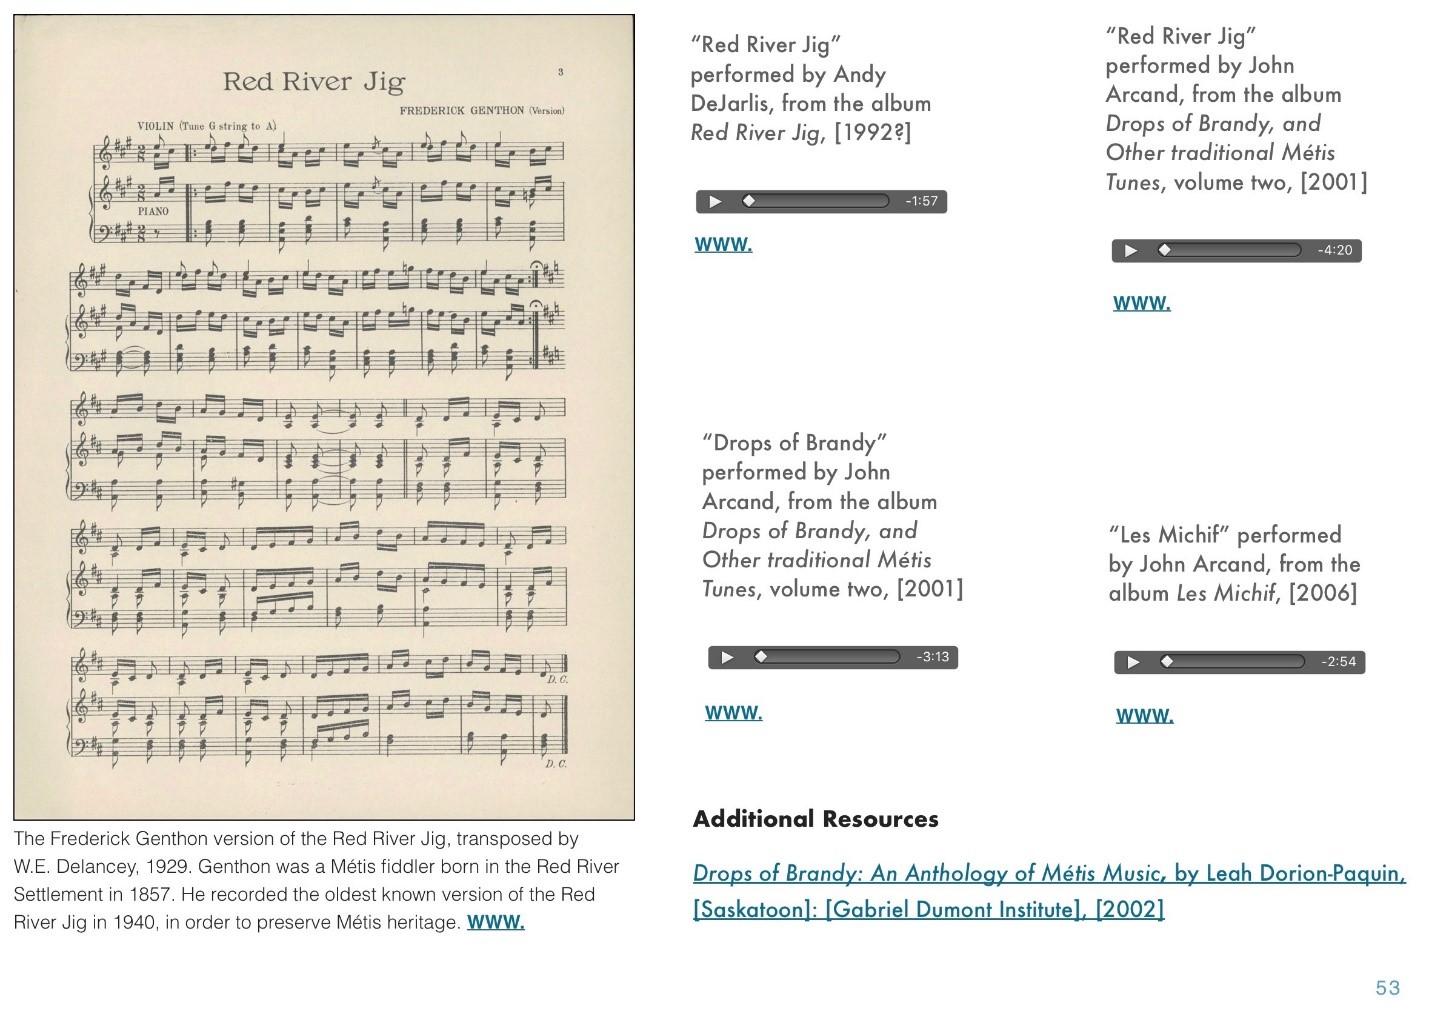 Screenshot of an e-book page showing a sheet from a musical score on the left side. On the right side, there are the titles of four English songs. In the e-book, you may click on the arrow below each song to listen to a recording. There are also web links in the e-book for more information.